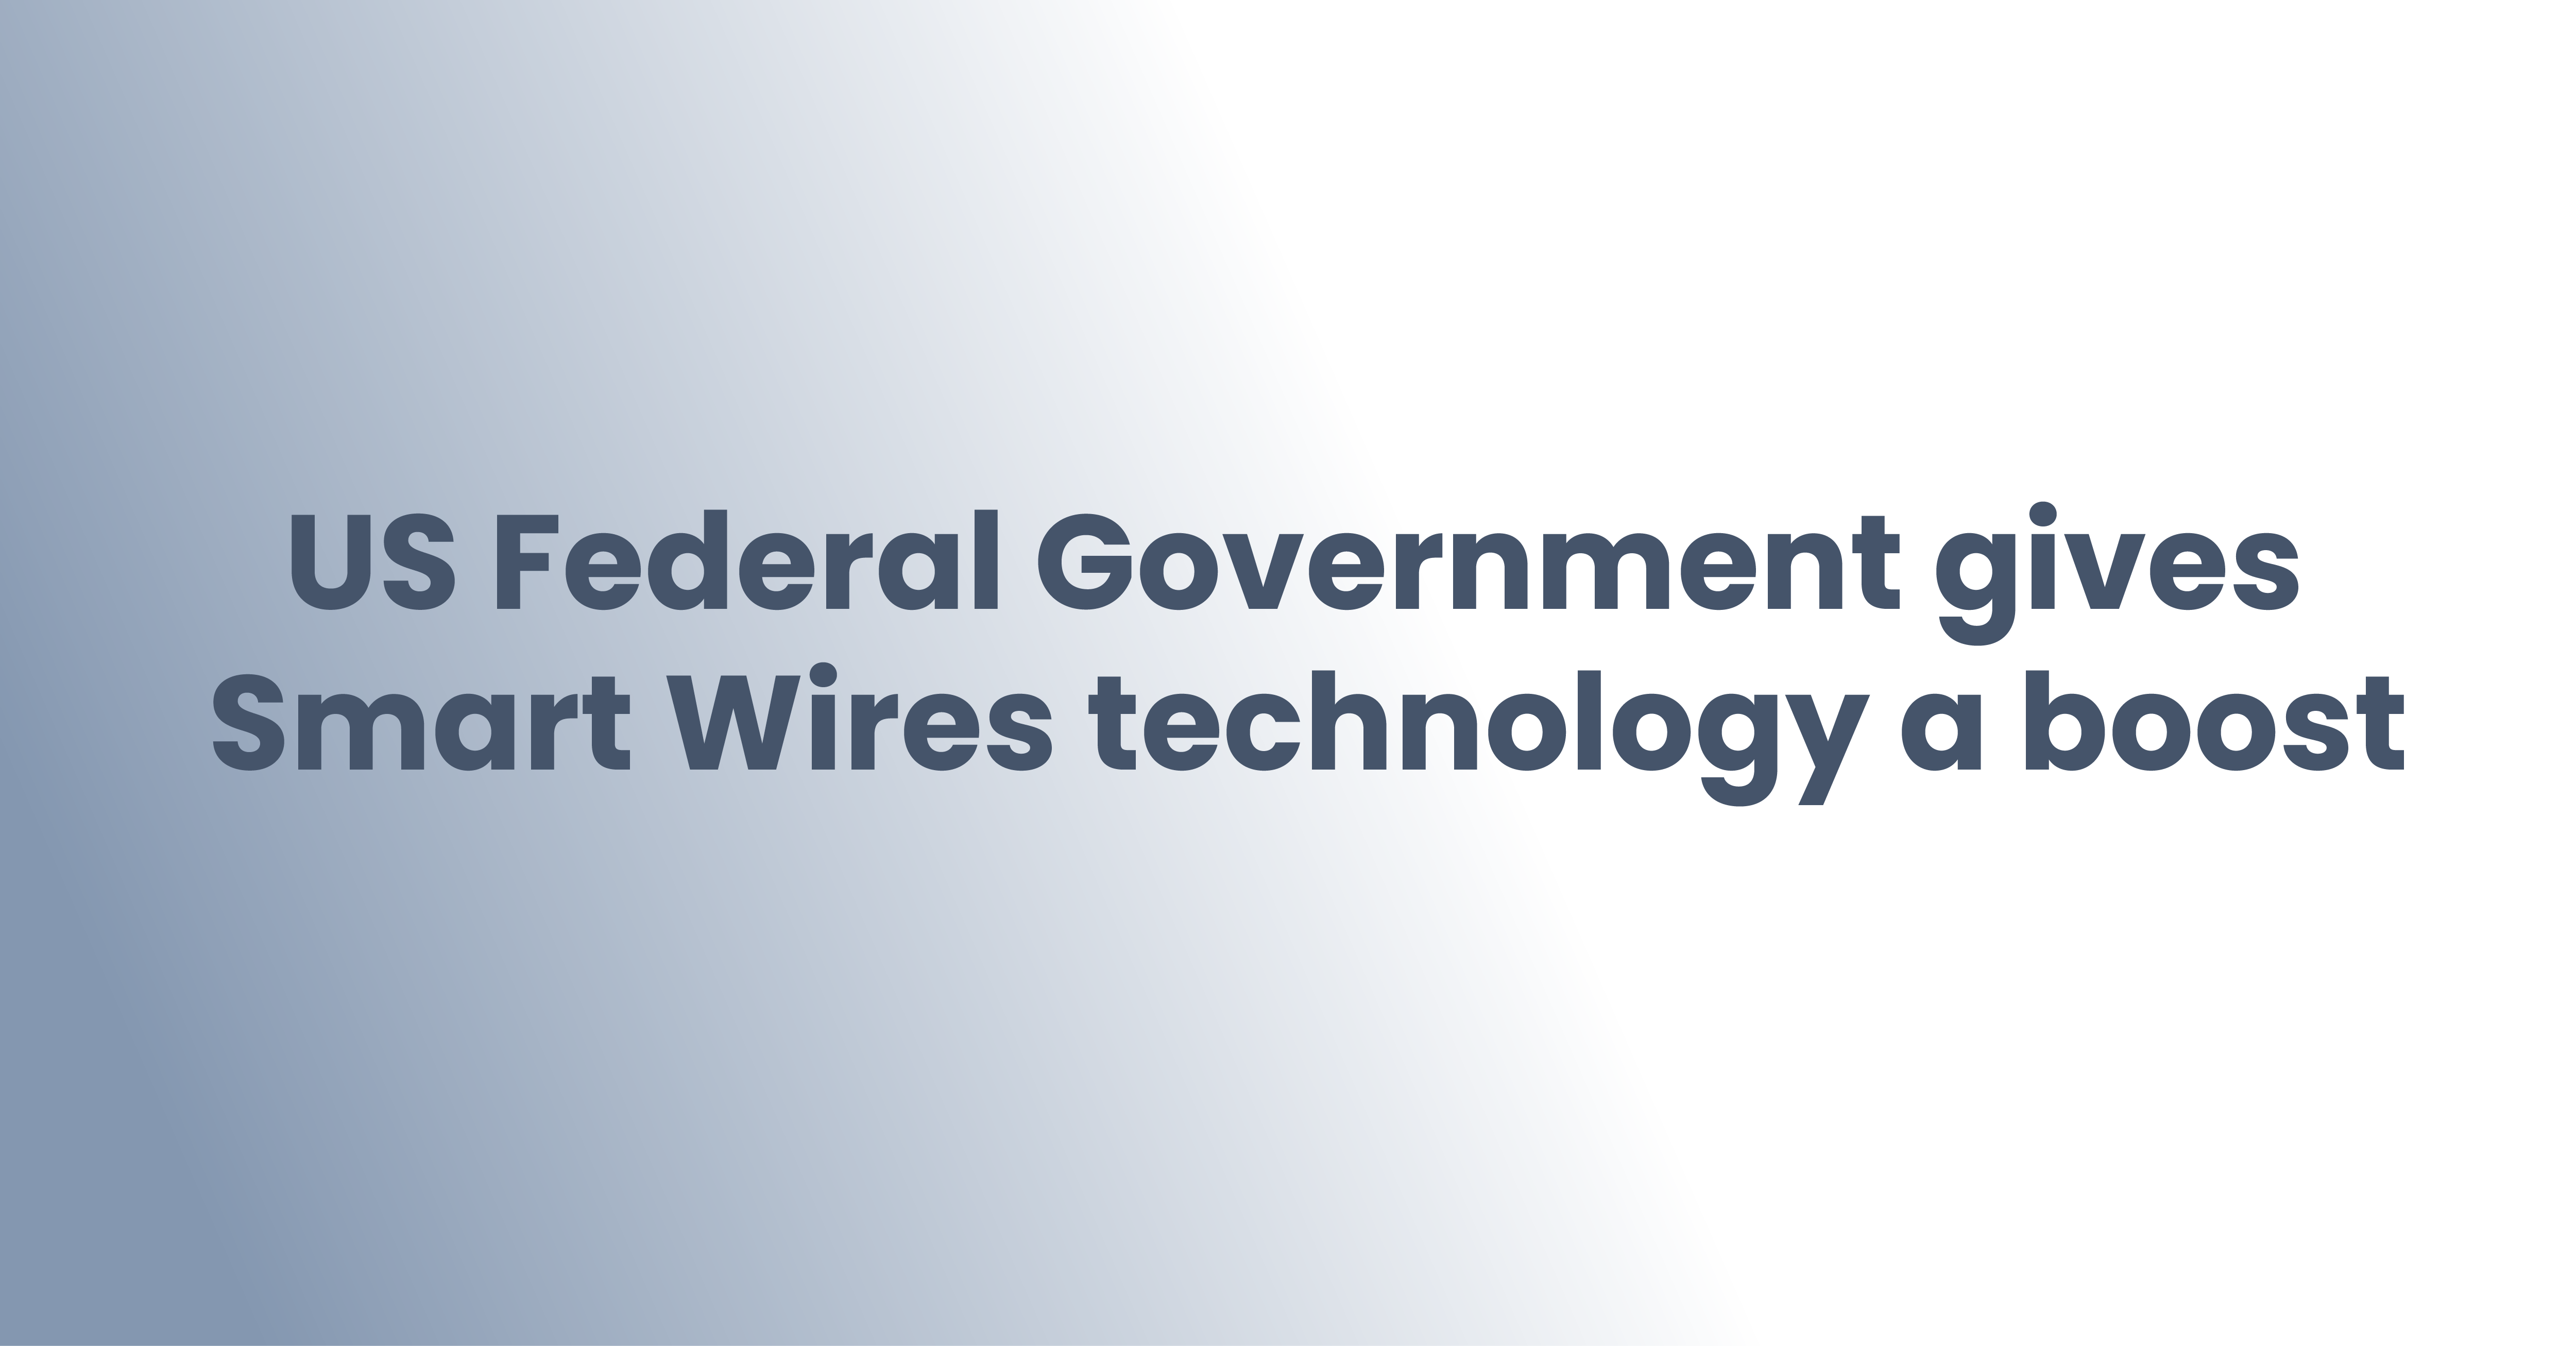 US Federal Government gives Smart Wires technology a boost